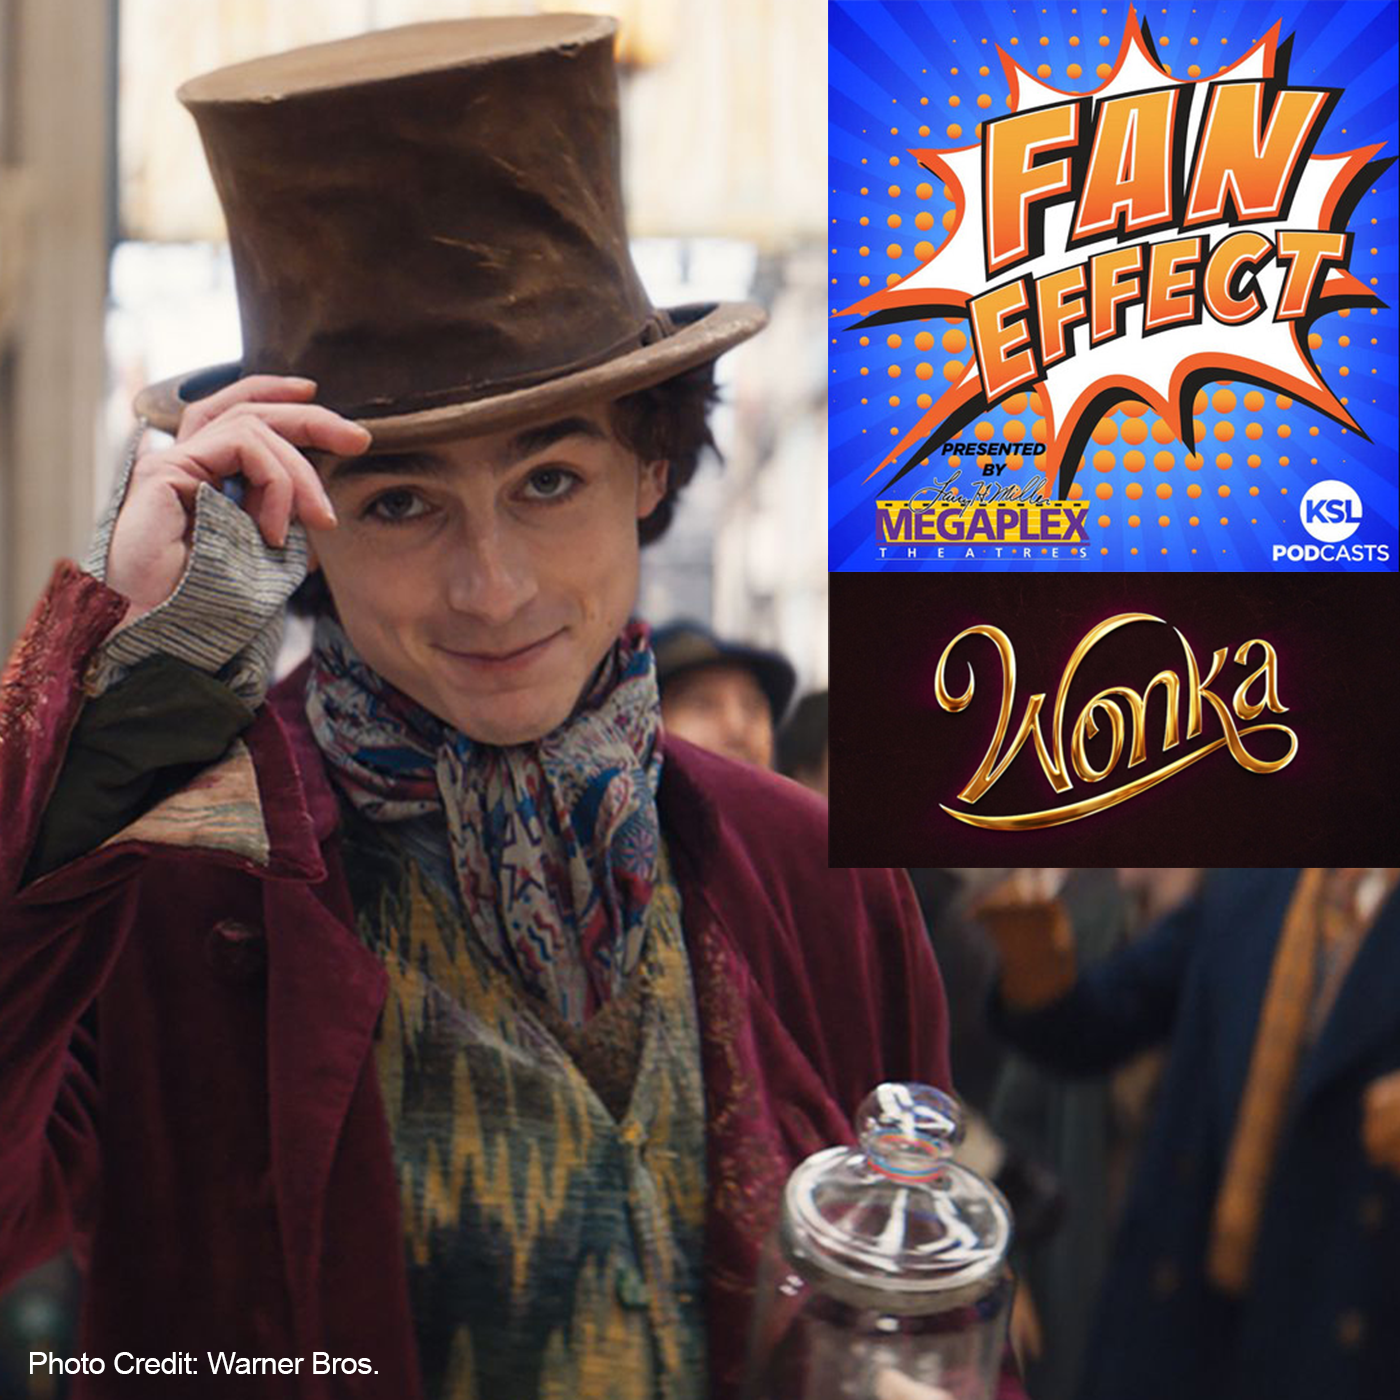 The magical musical ‘Wonka’ is now on digital, so let’s discuss it! 